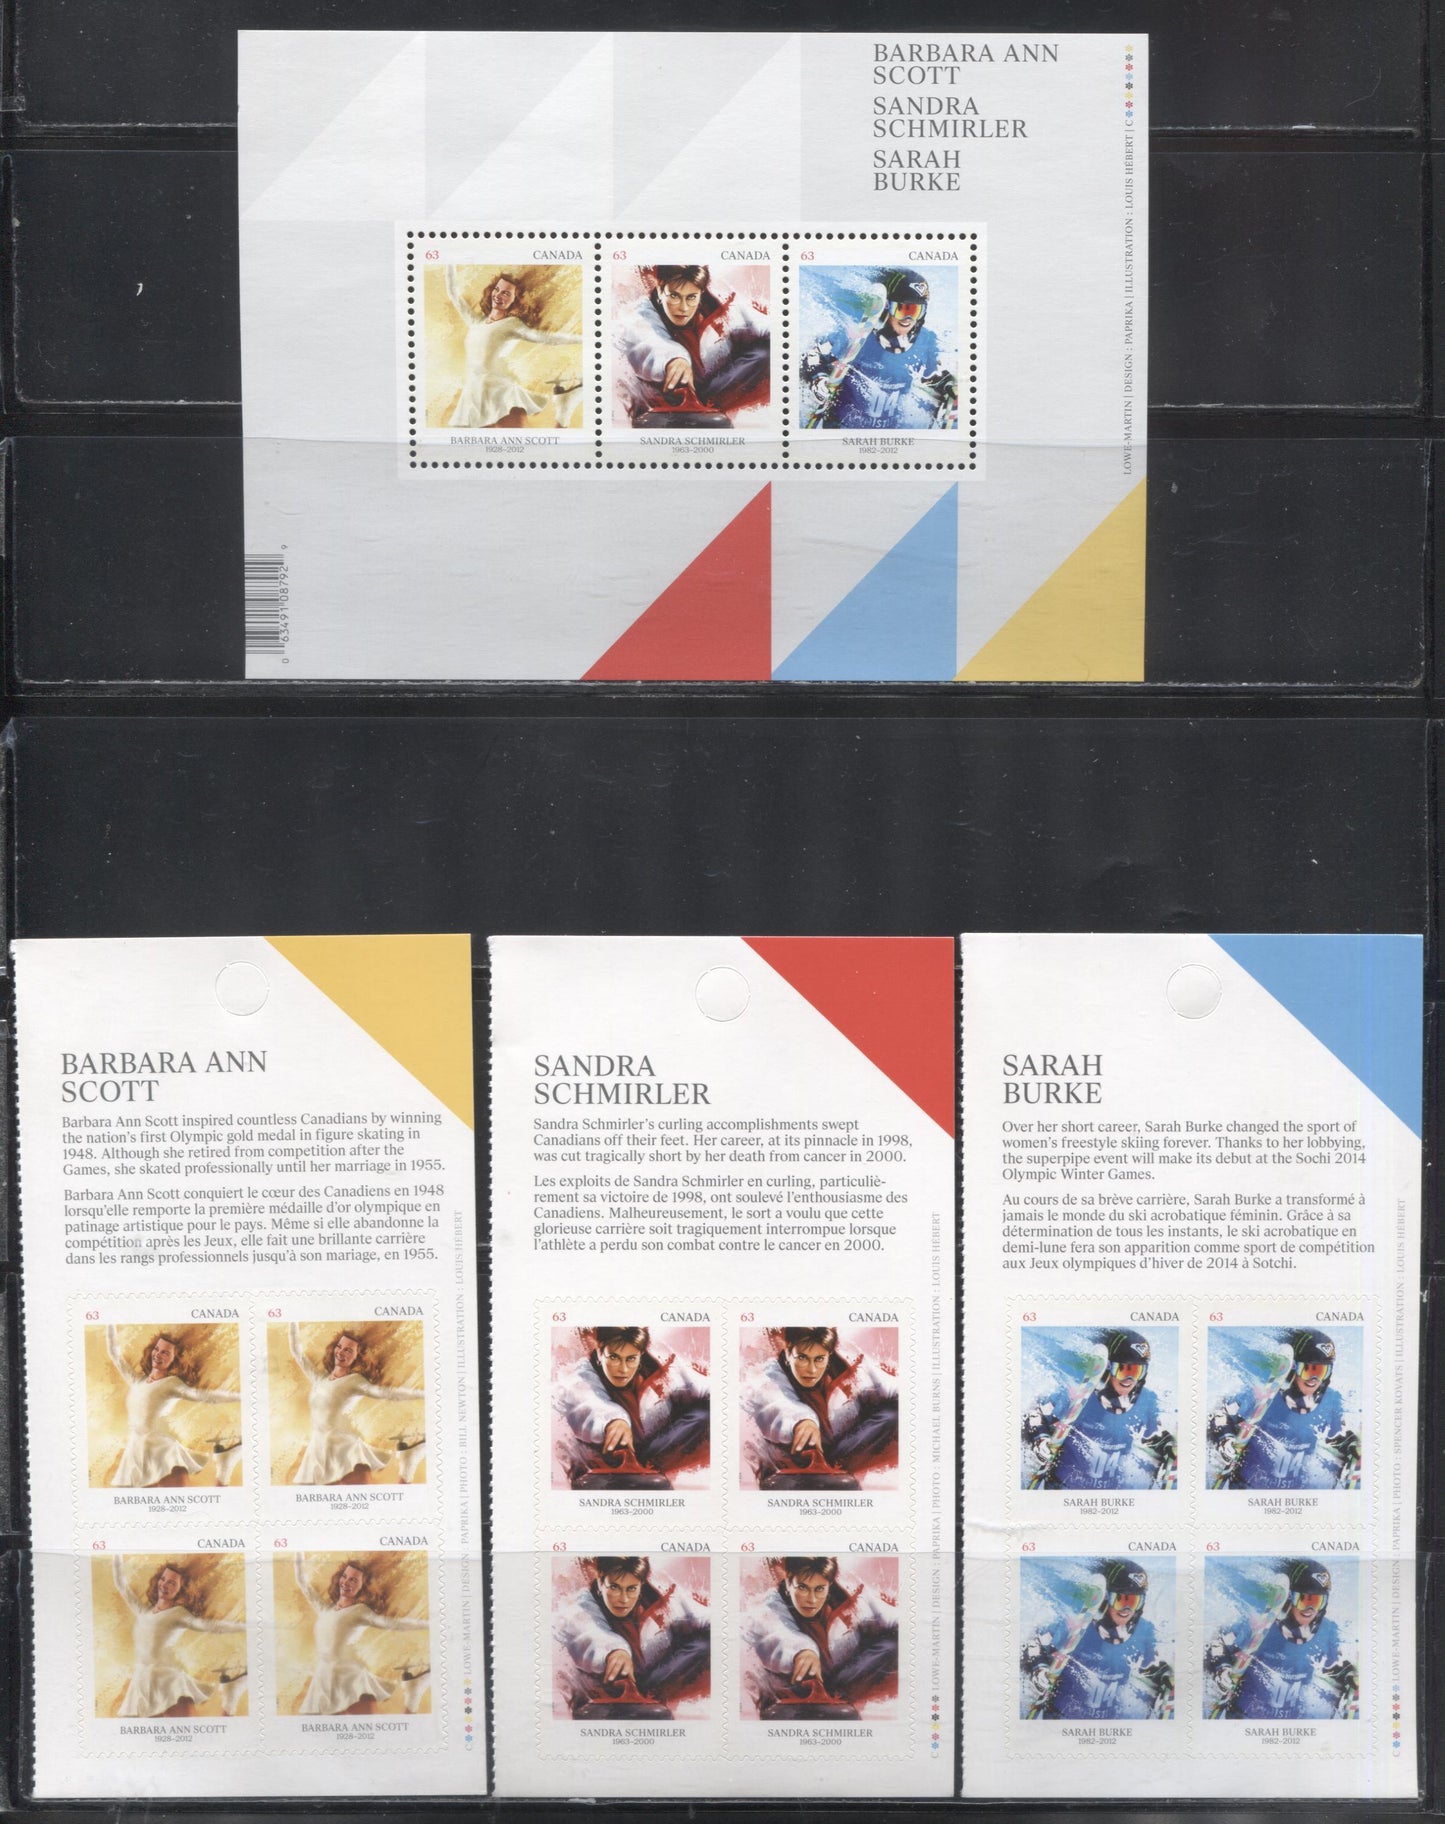 Lot 116 Canada #2704-2707 2014 Winter Sports Pioneers A VFNH Souvenir Sheet and Booklet Panes of 4 on LF TRC Paper